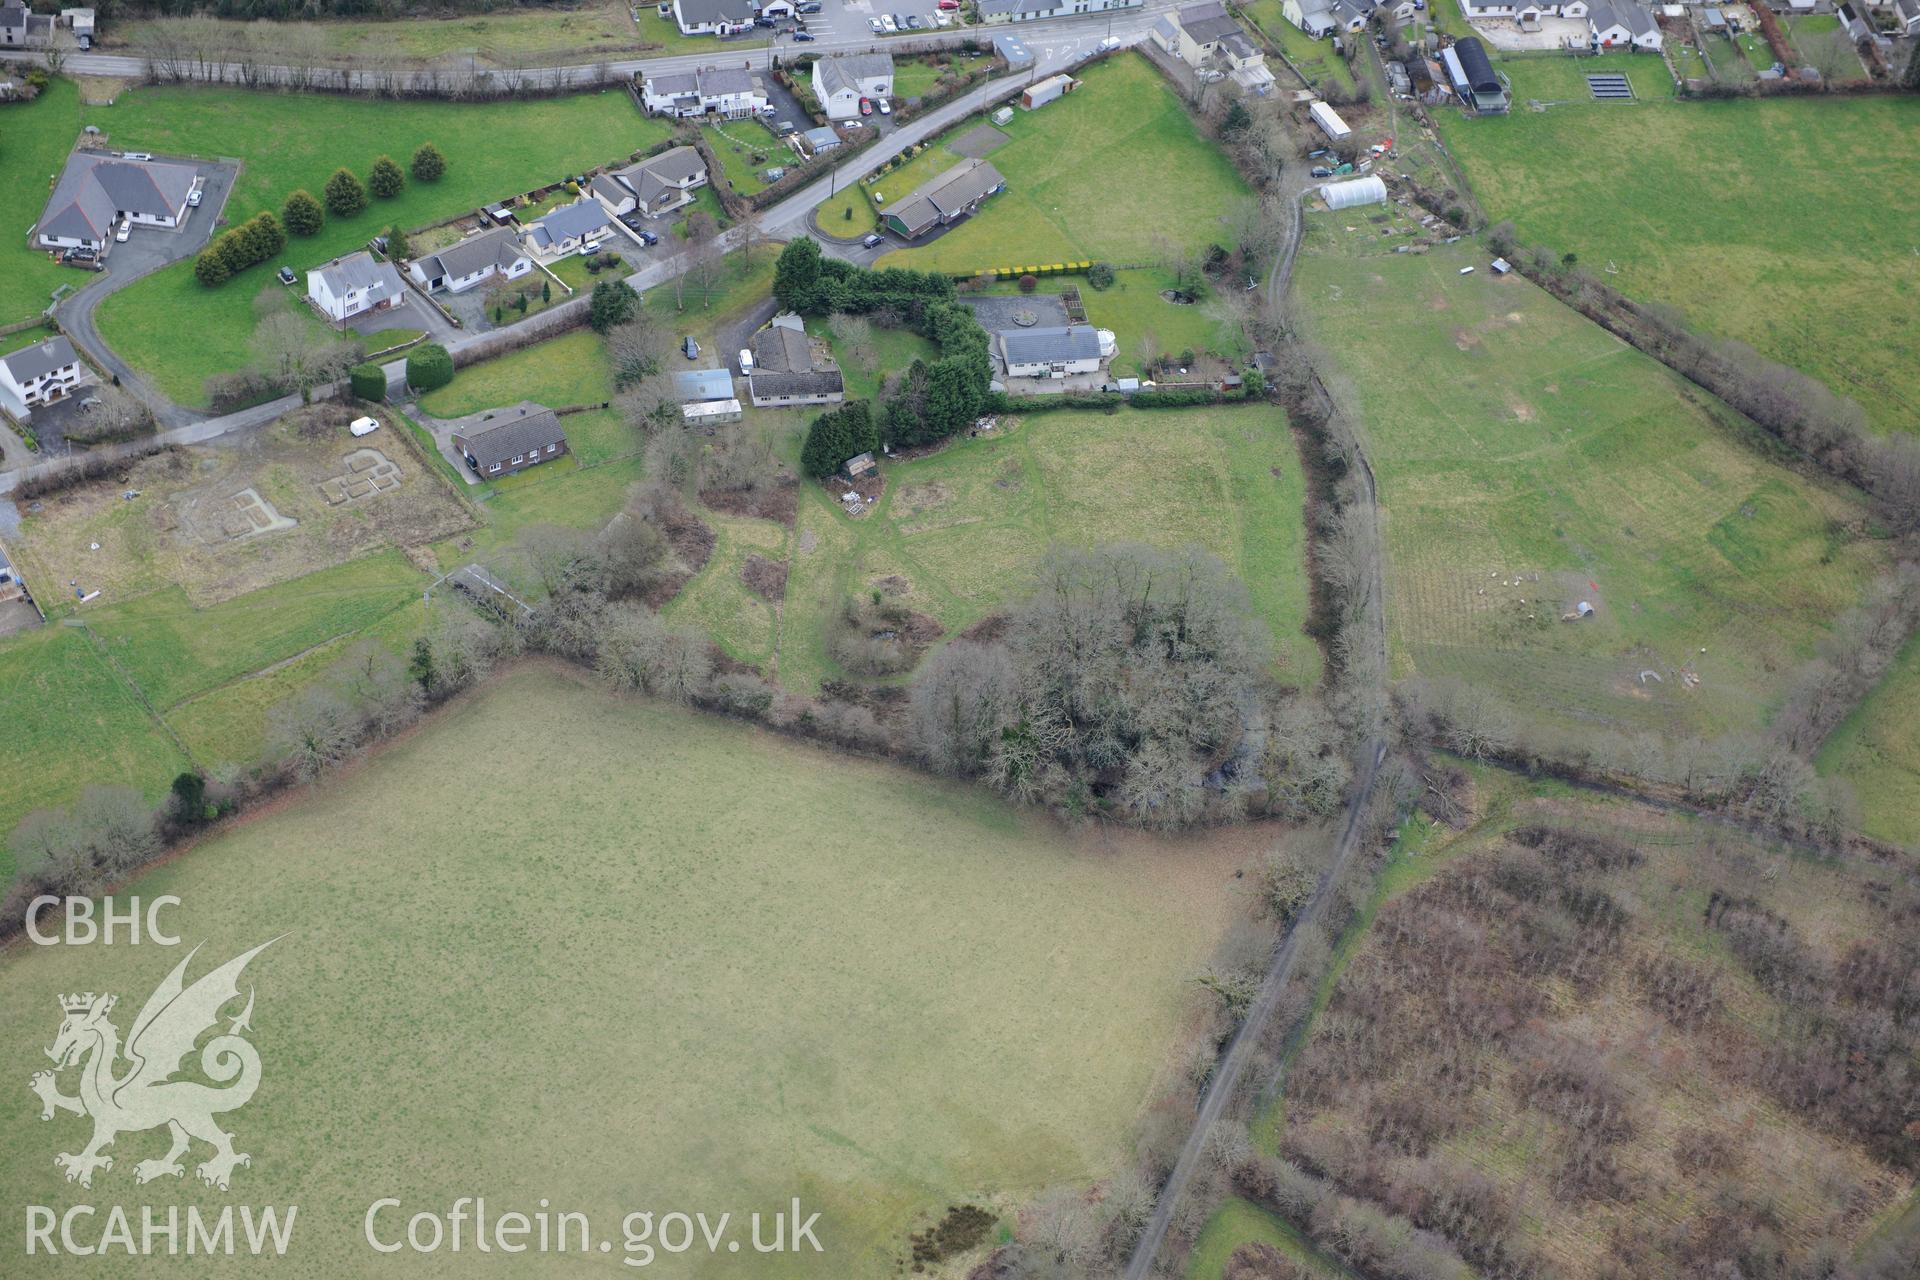 Castell Nant-y-Garan motte, Penrhiw-llan, between Newcastle Emlyn and Llandysul. Oblique aerial photograph taken during the Royal Commission's programme of archaeological aerial reconnaissance by Toby Driver on 13th March 2015.